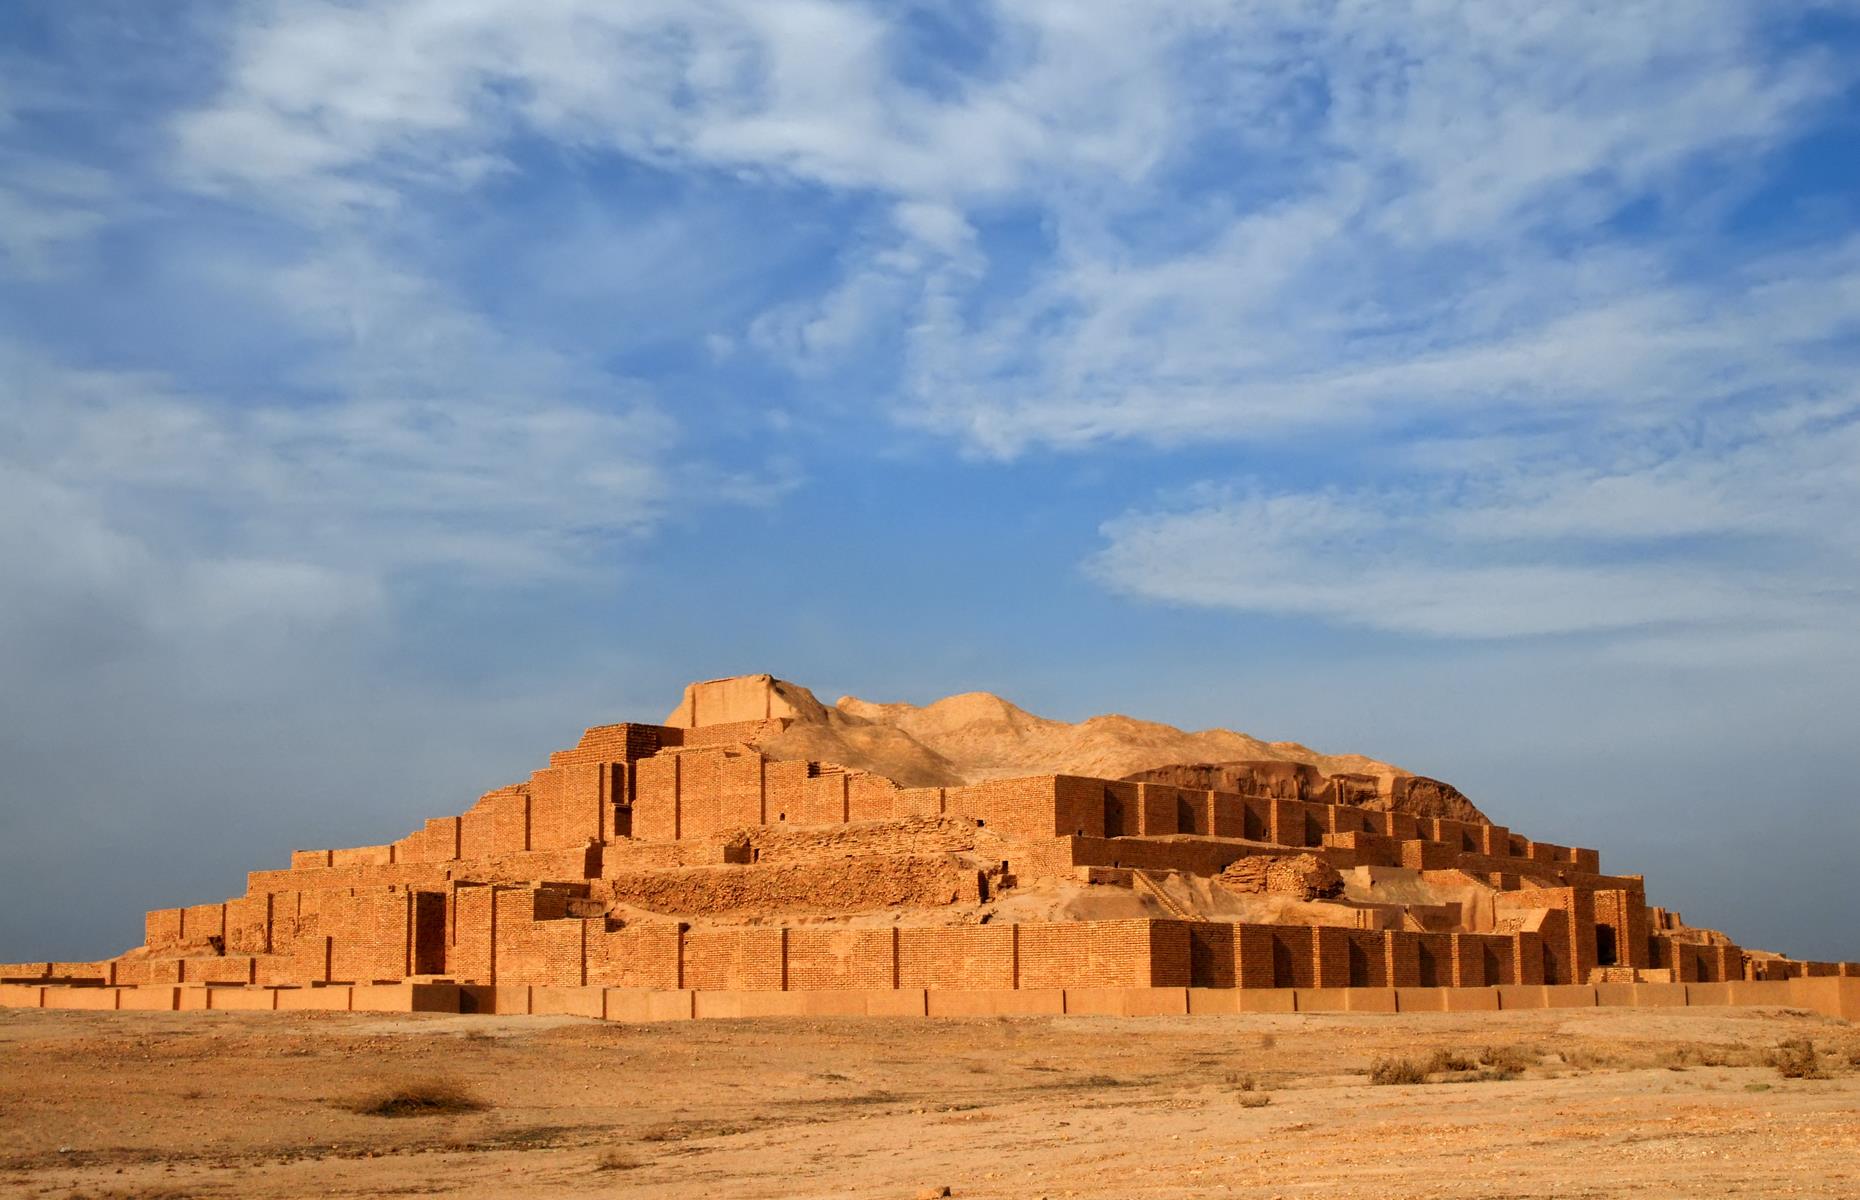 The first of Iran's historical sites to be inscribed on UNESCO’s World Heritage List, Choqa Zanbil is the best example of Elamite architecture in the world. The ancient Elam civilisation ruled in the far west and south-west of Iran before the Achaemenid Empire and the ruins of the palace and temple complex near Susa are very impressive.